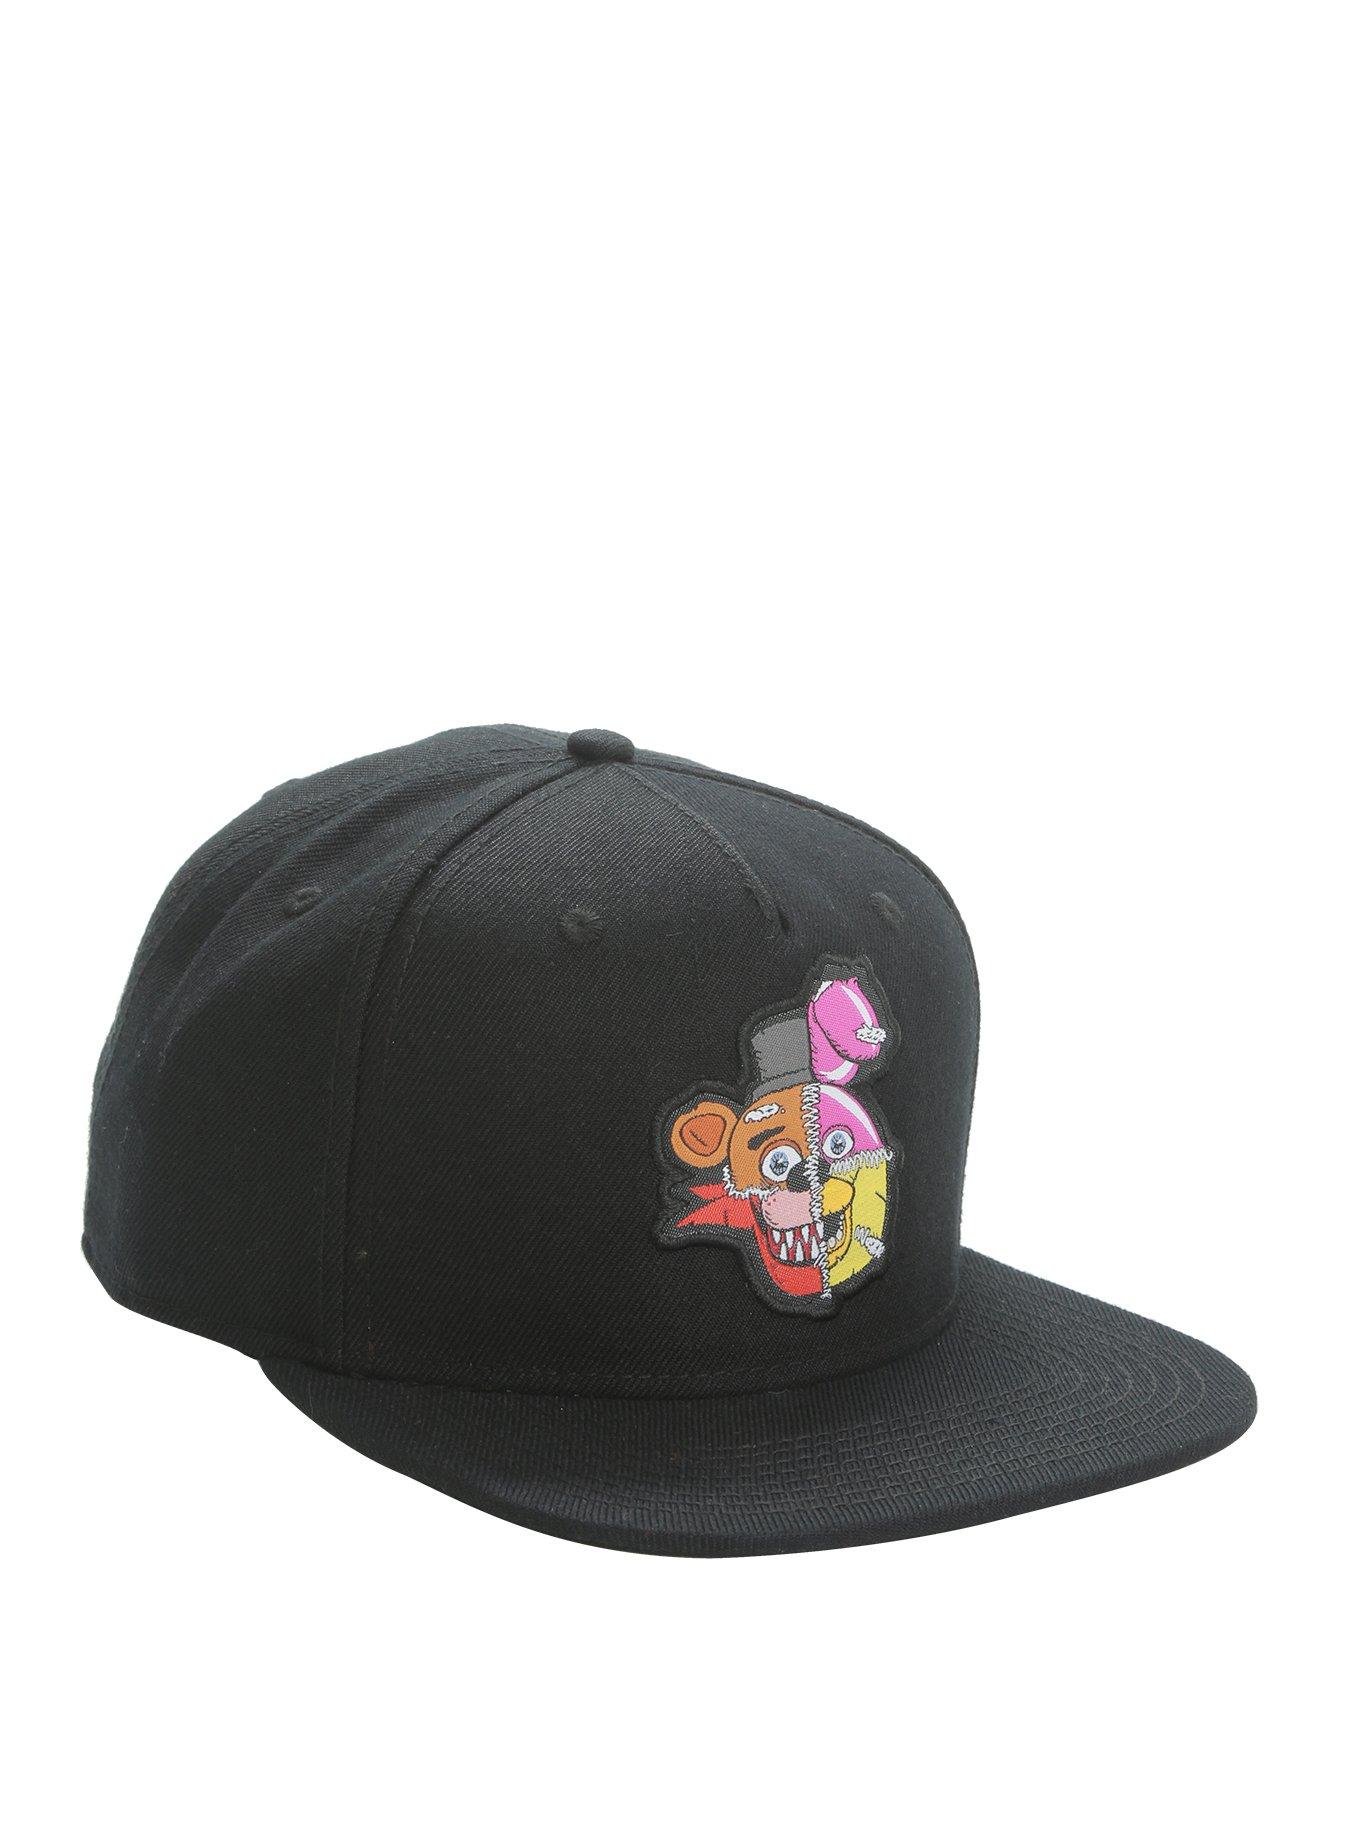 Five Nights At Freddy's Stitched Character's Snapback Hat | Hot Topic